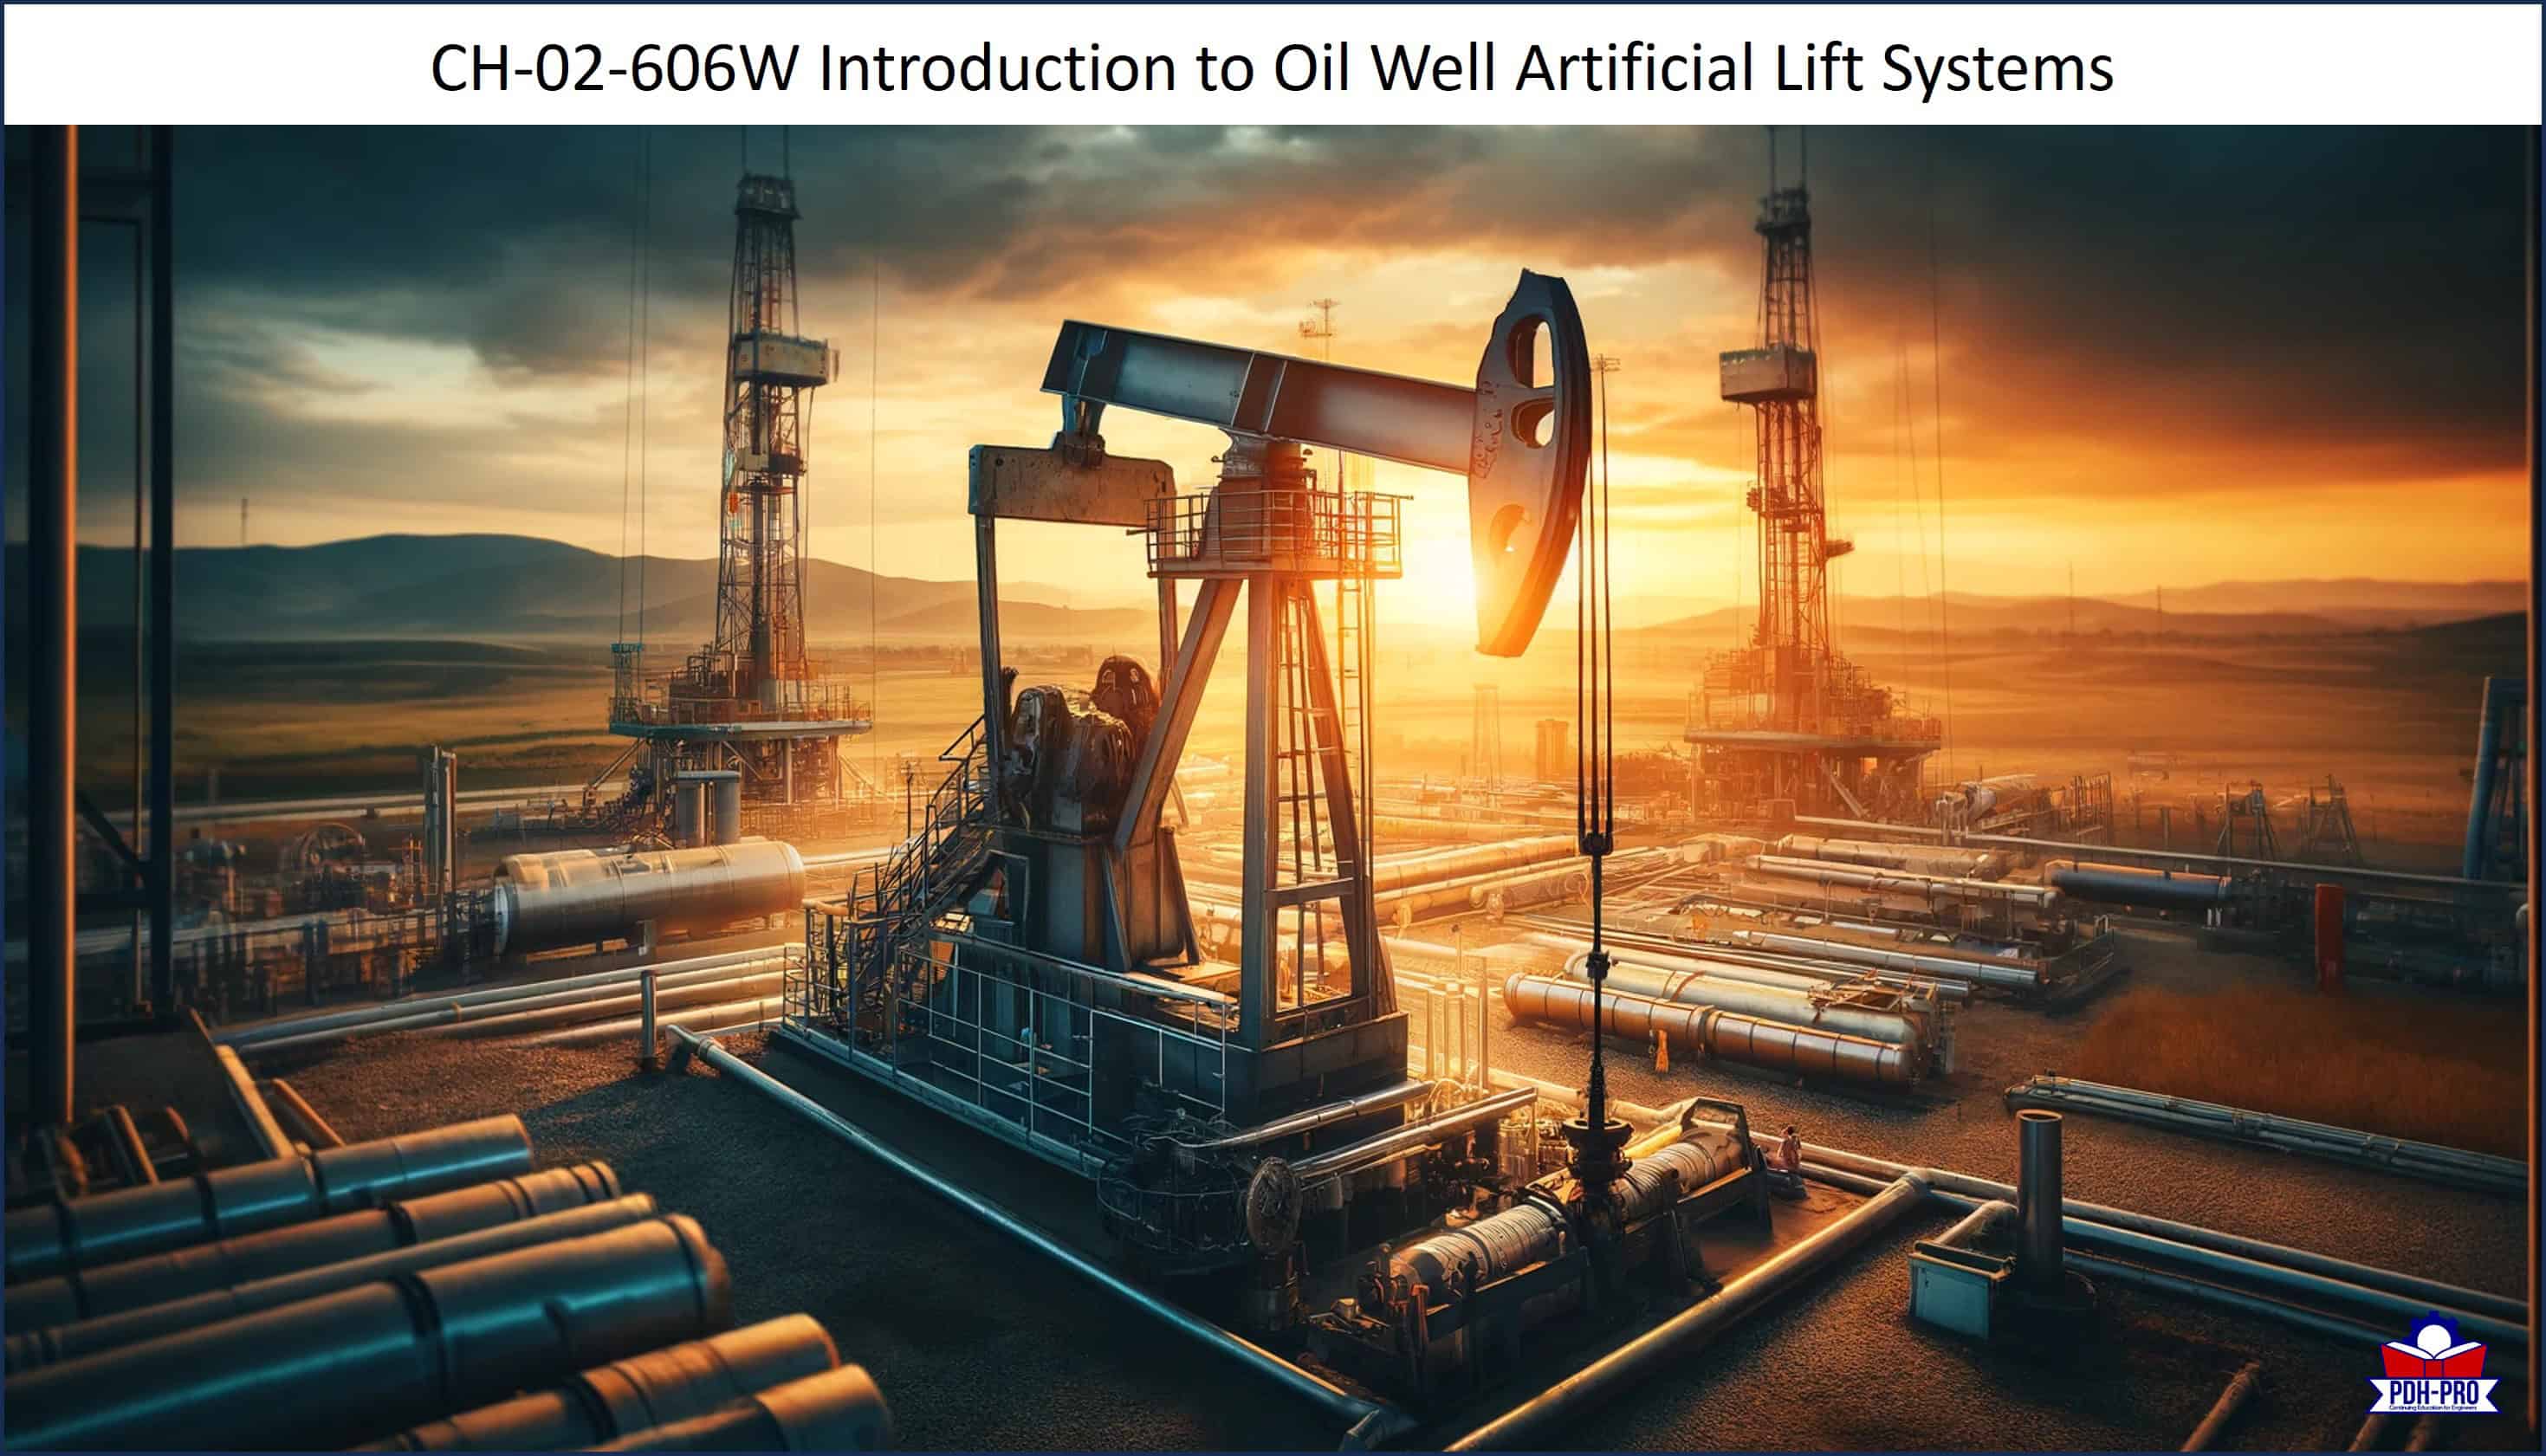 Introduction to Oil Well Artificial Lift Systems